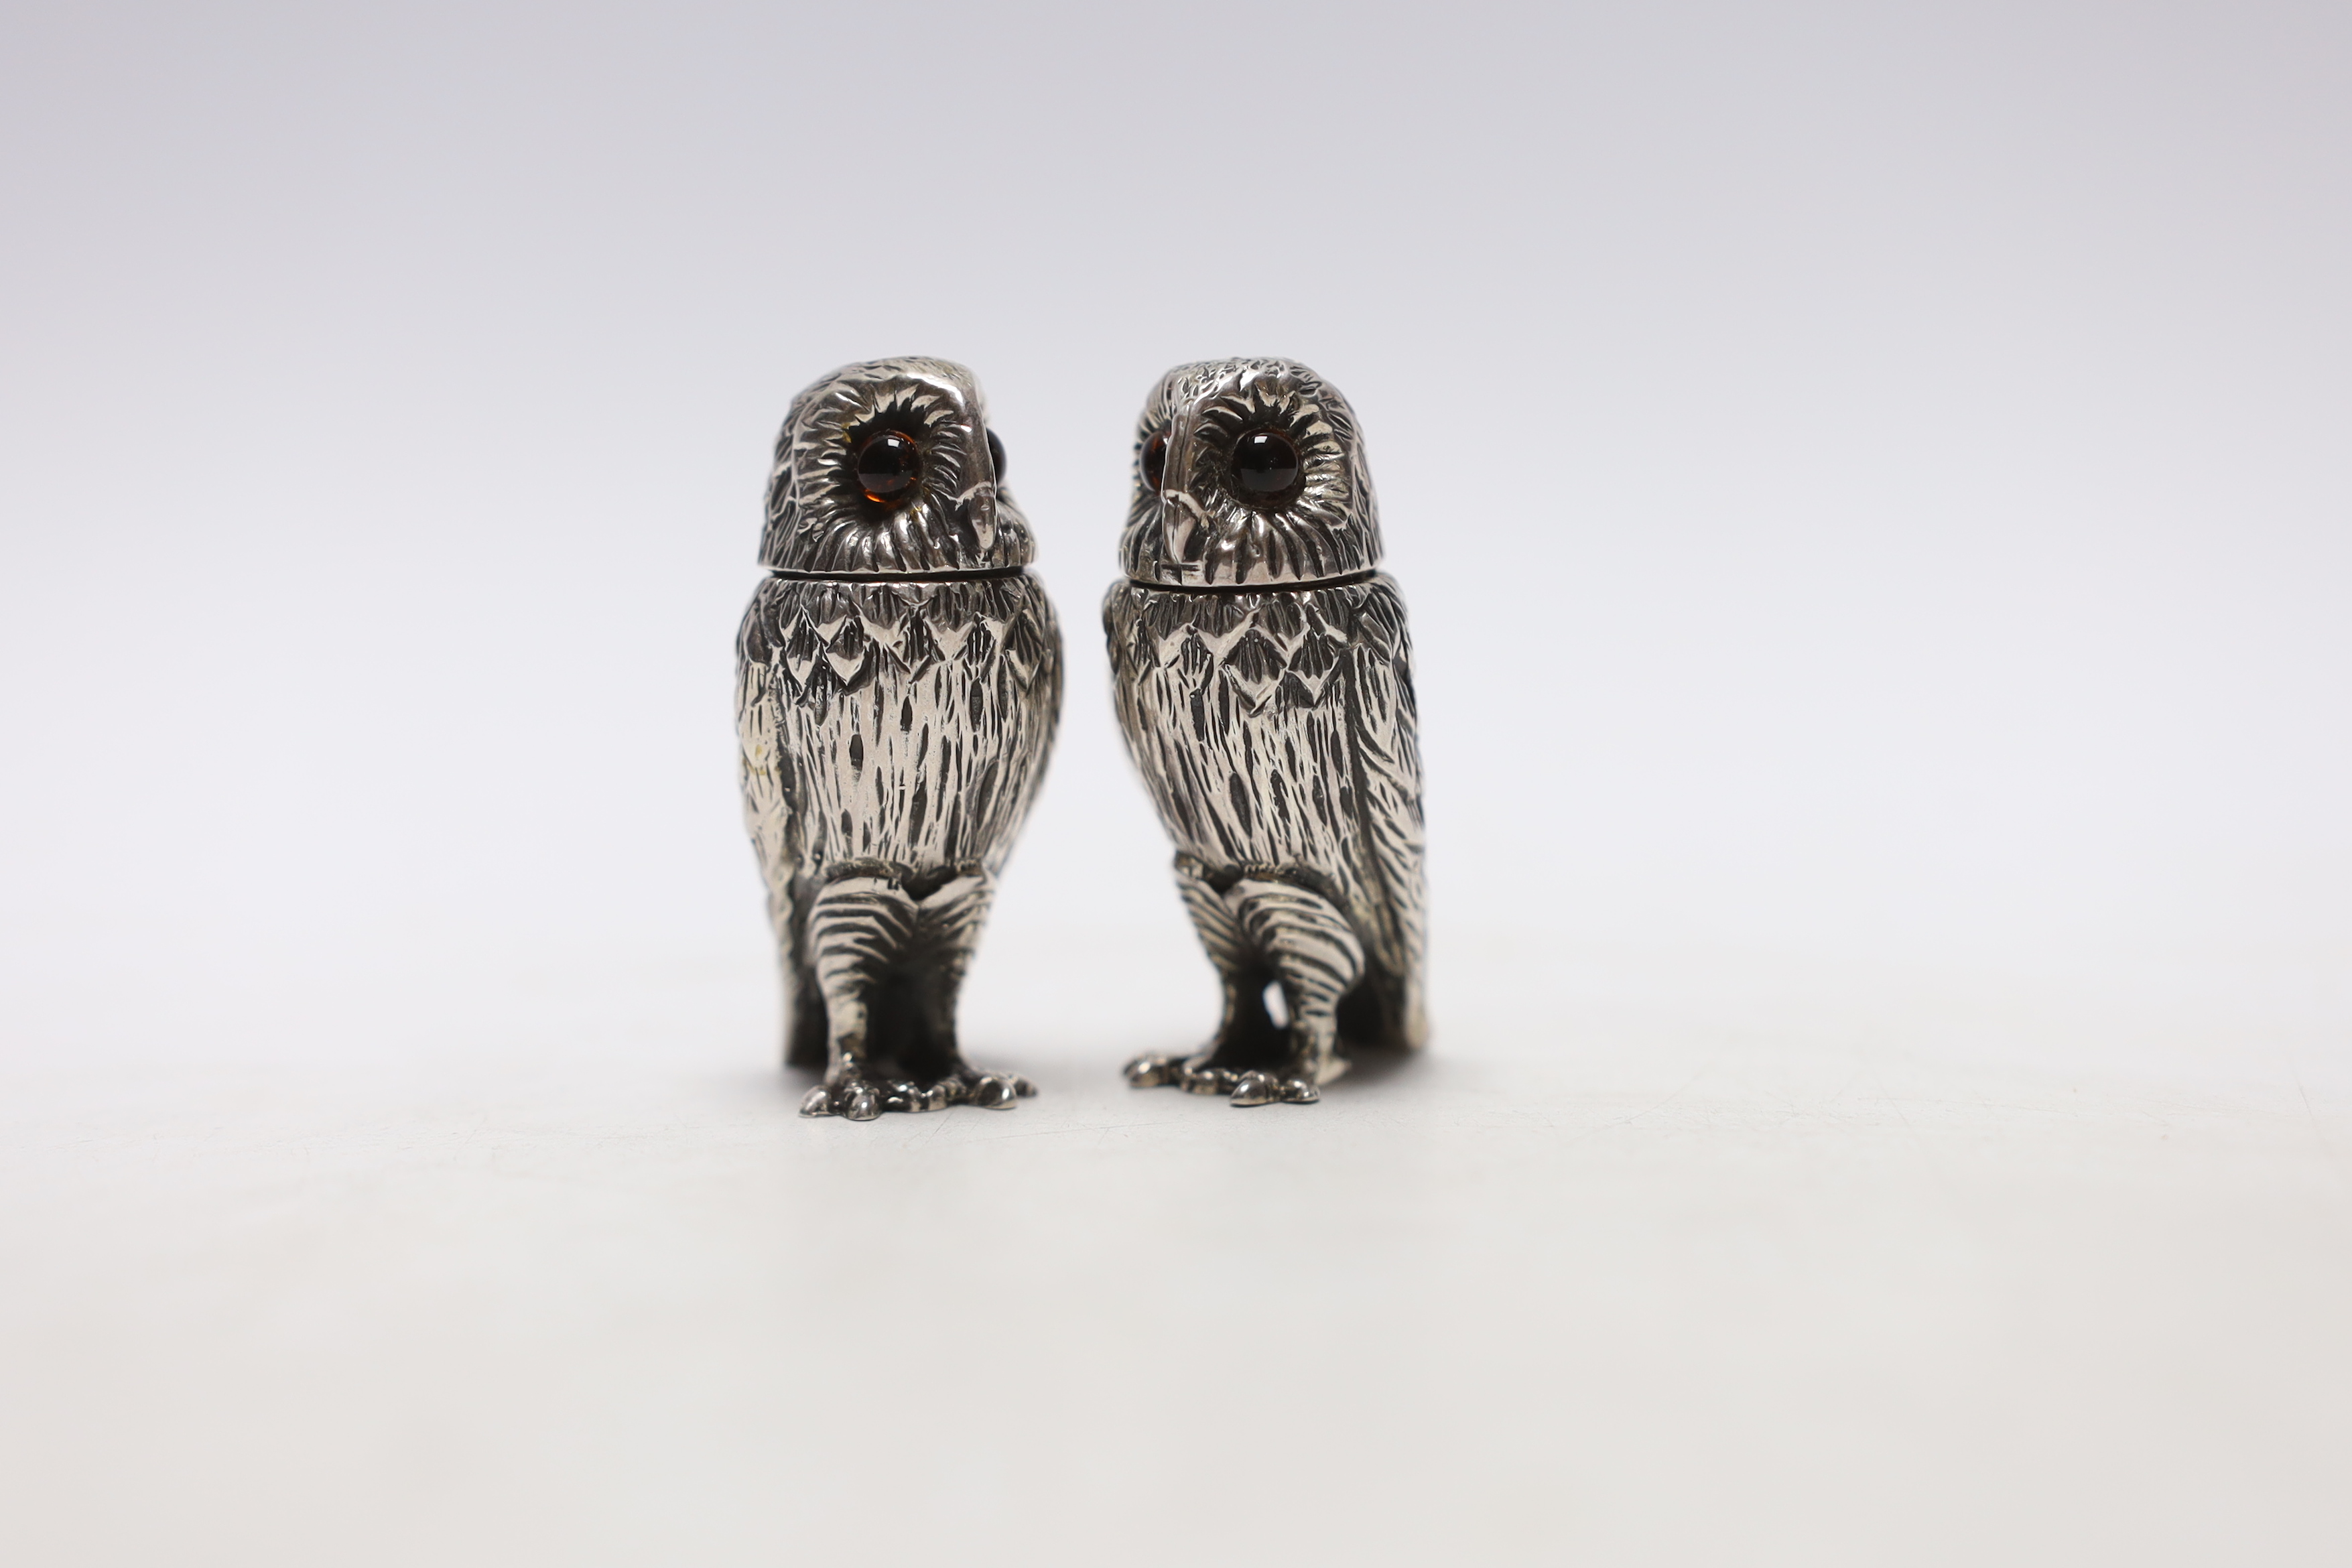 A pair of Elizabeth II novelty silver condiments, each modelled as an owl, maker WW, London, 2008, - Image 2 of 4